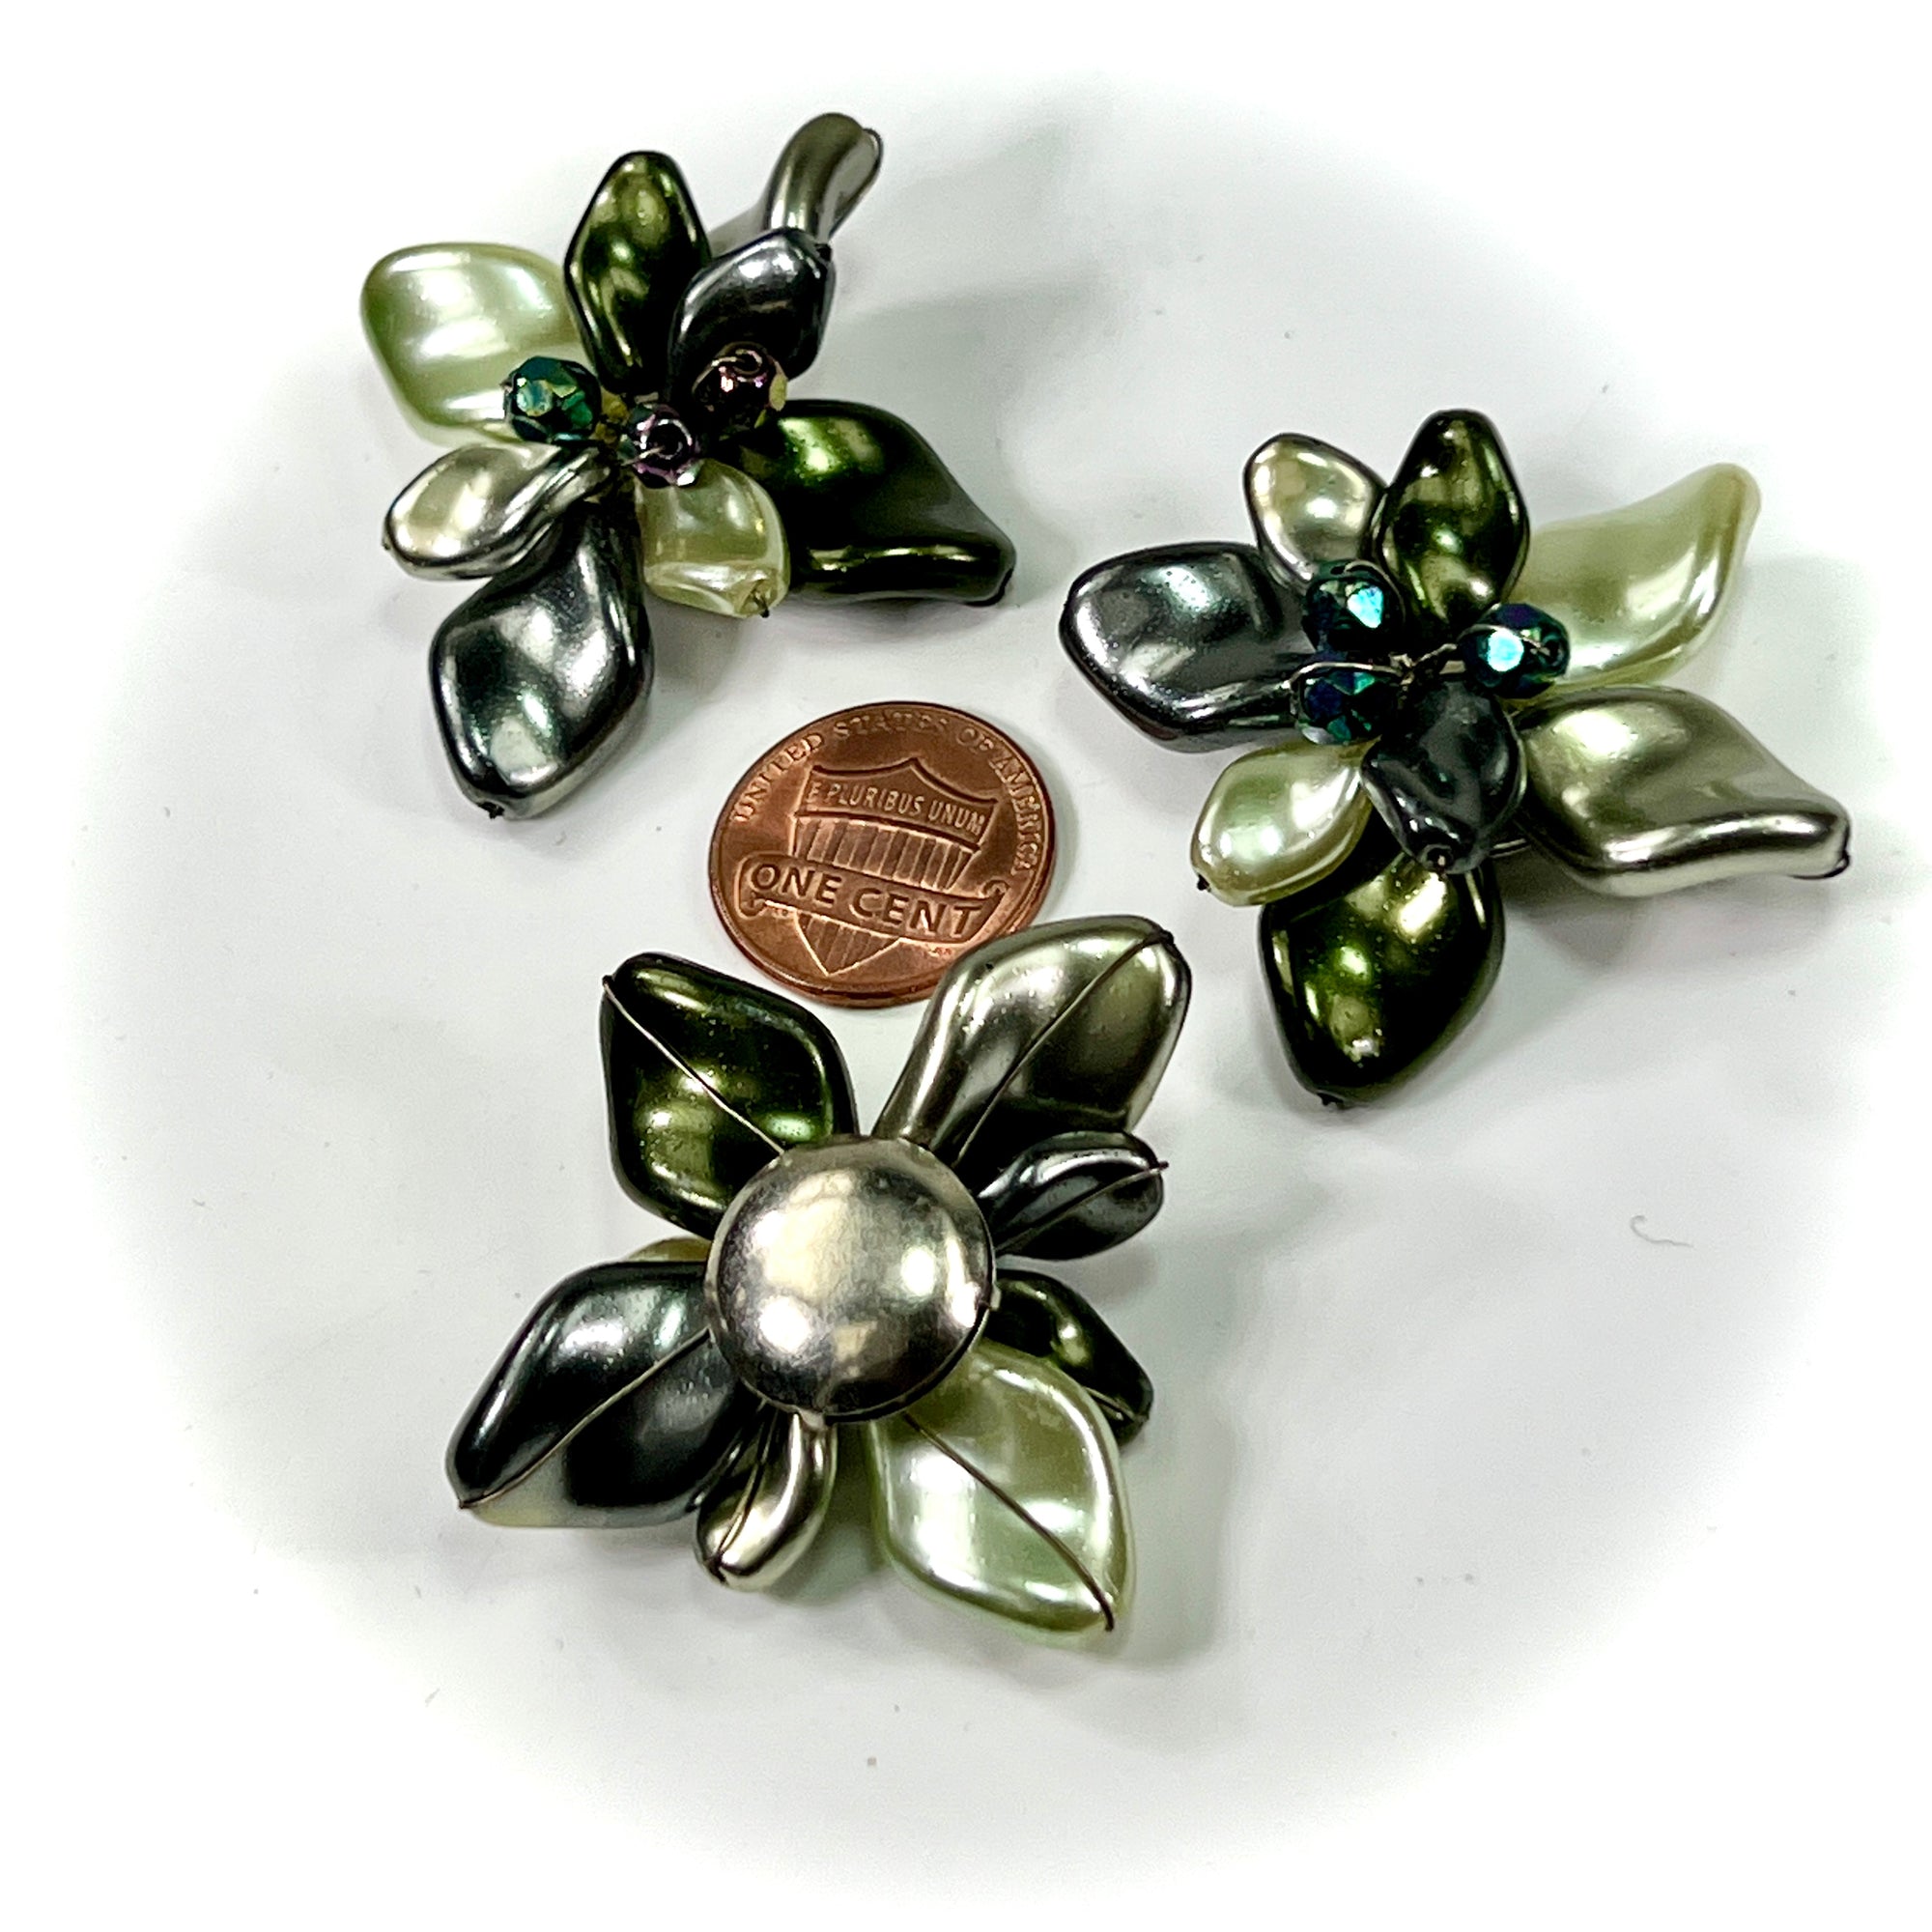 Czech Glass Beads 1.5 inch Flower Ornament Green and Grey Color Combination 1 piece CA024